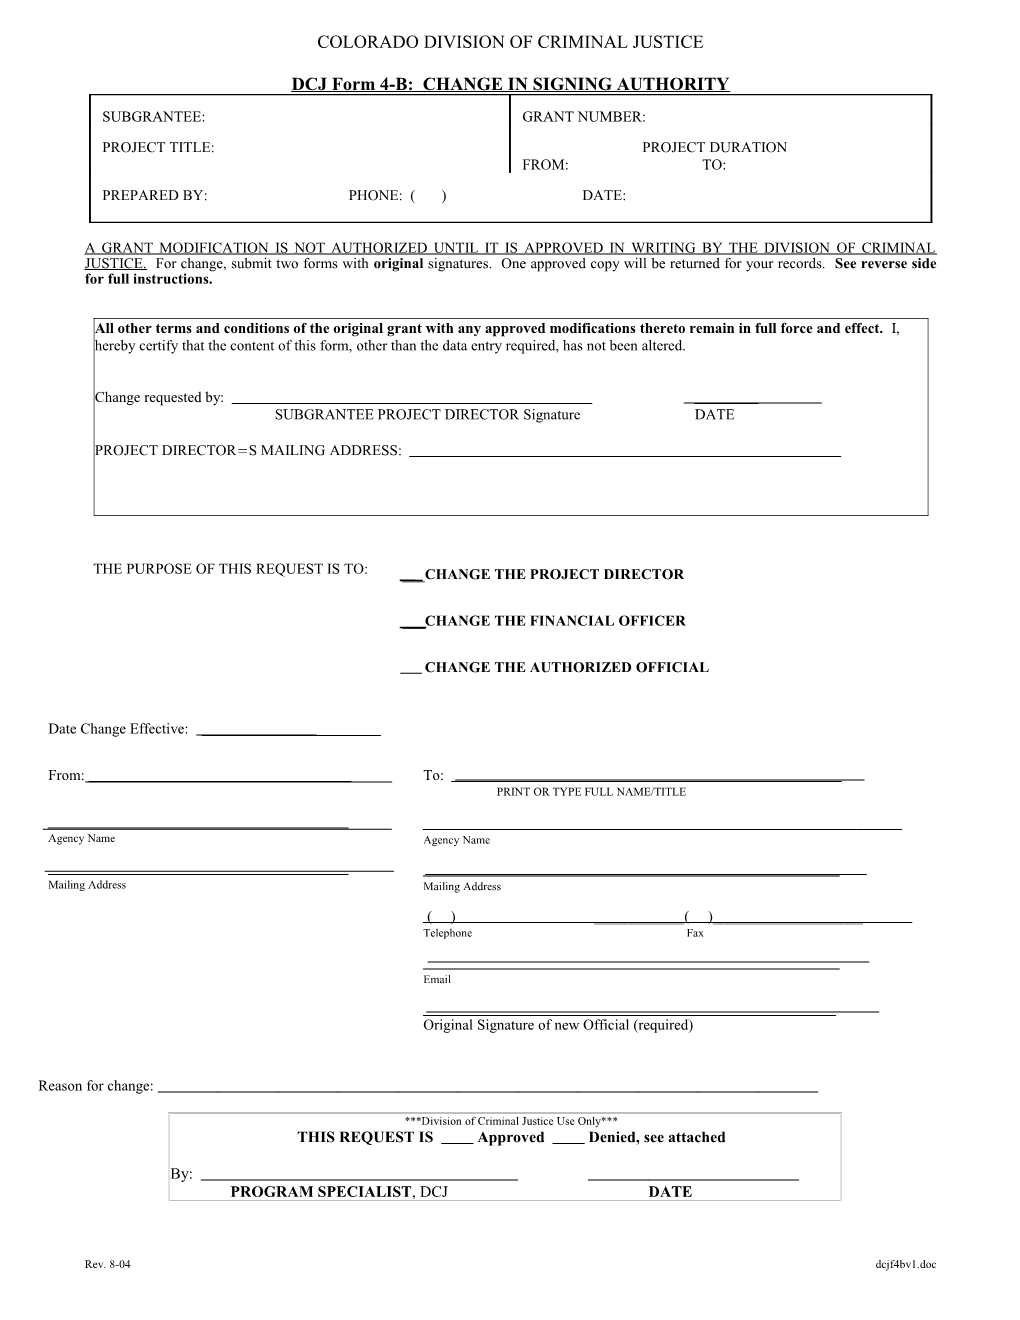 DCJ Form 4-B: CHANGE in SIGNING AUTHORITY